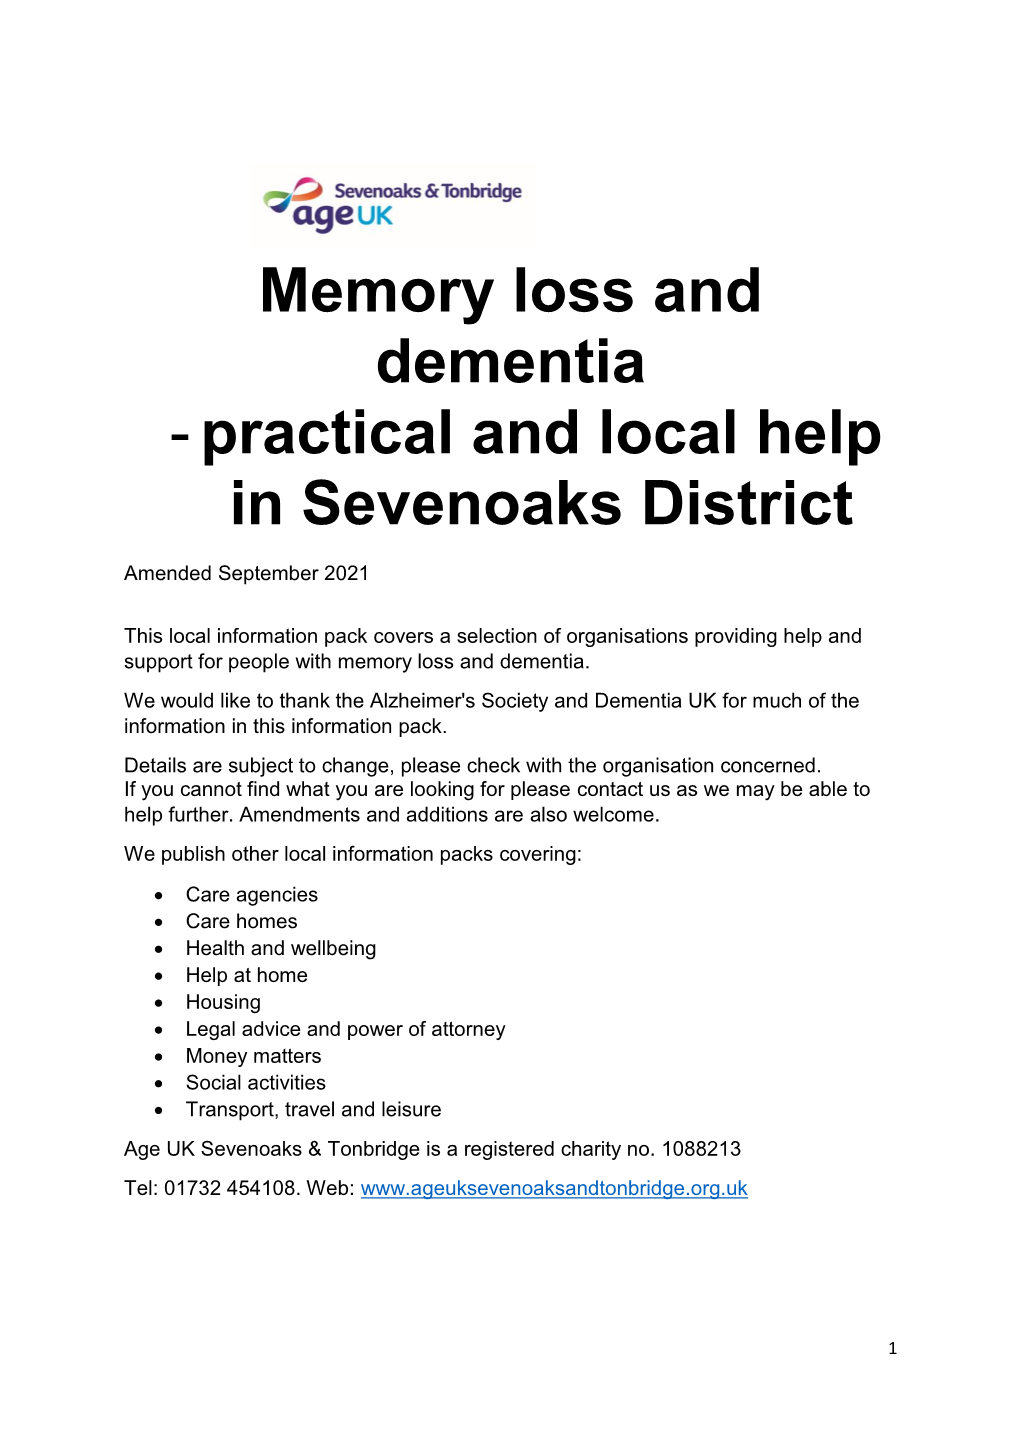 Memory Loss and Dementia - Practical and Local Help in Sevenoaks District